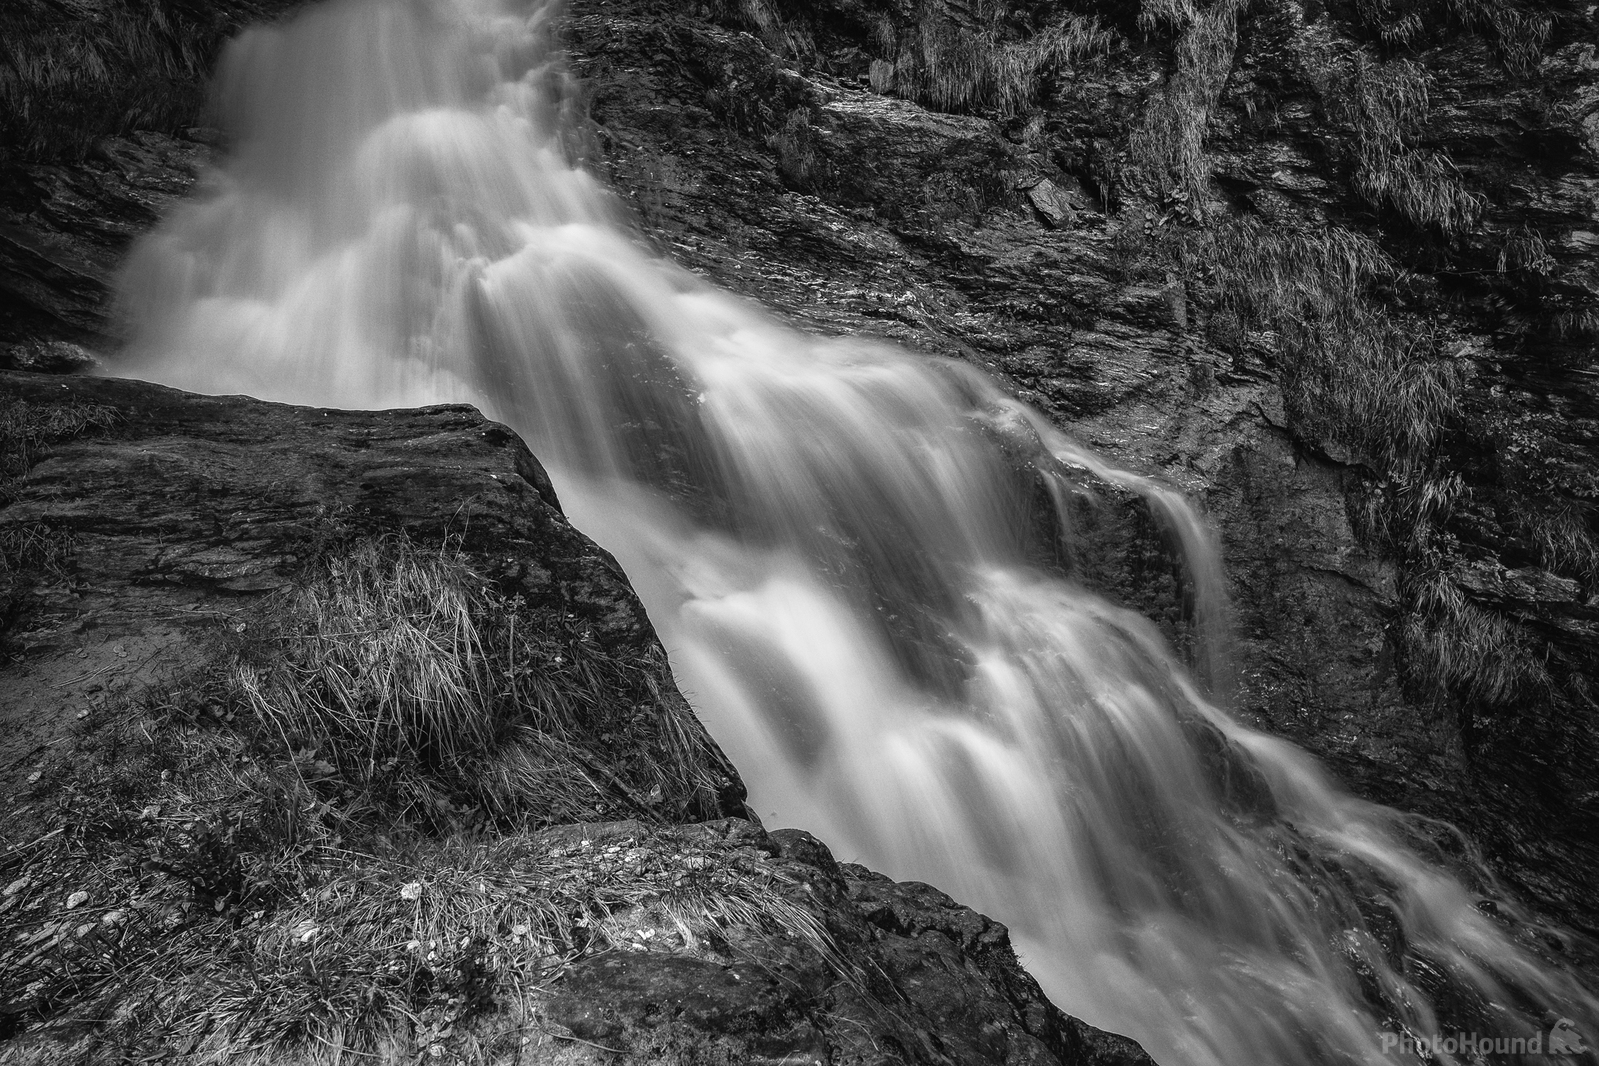 Image of Hirzbach Waterfall by James Billings.